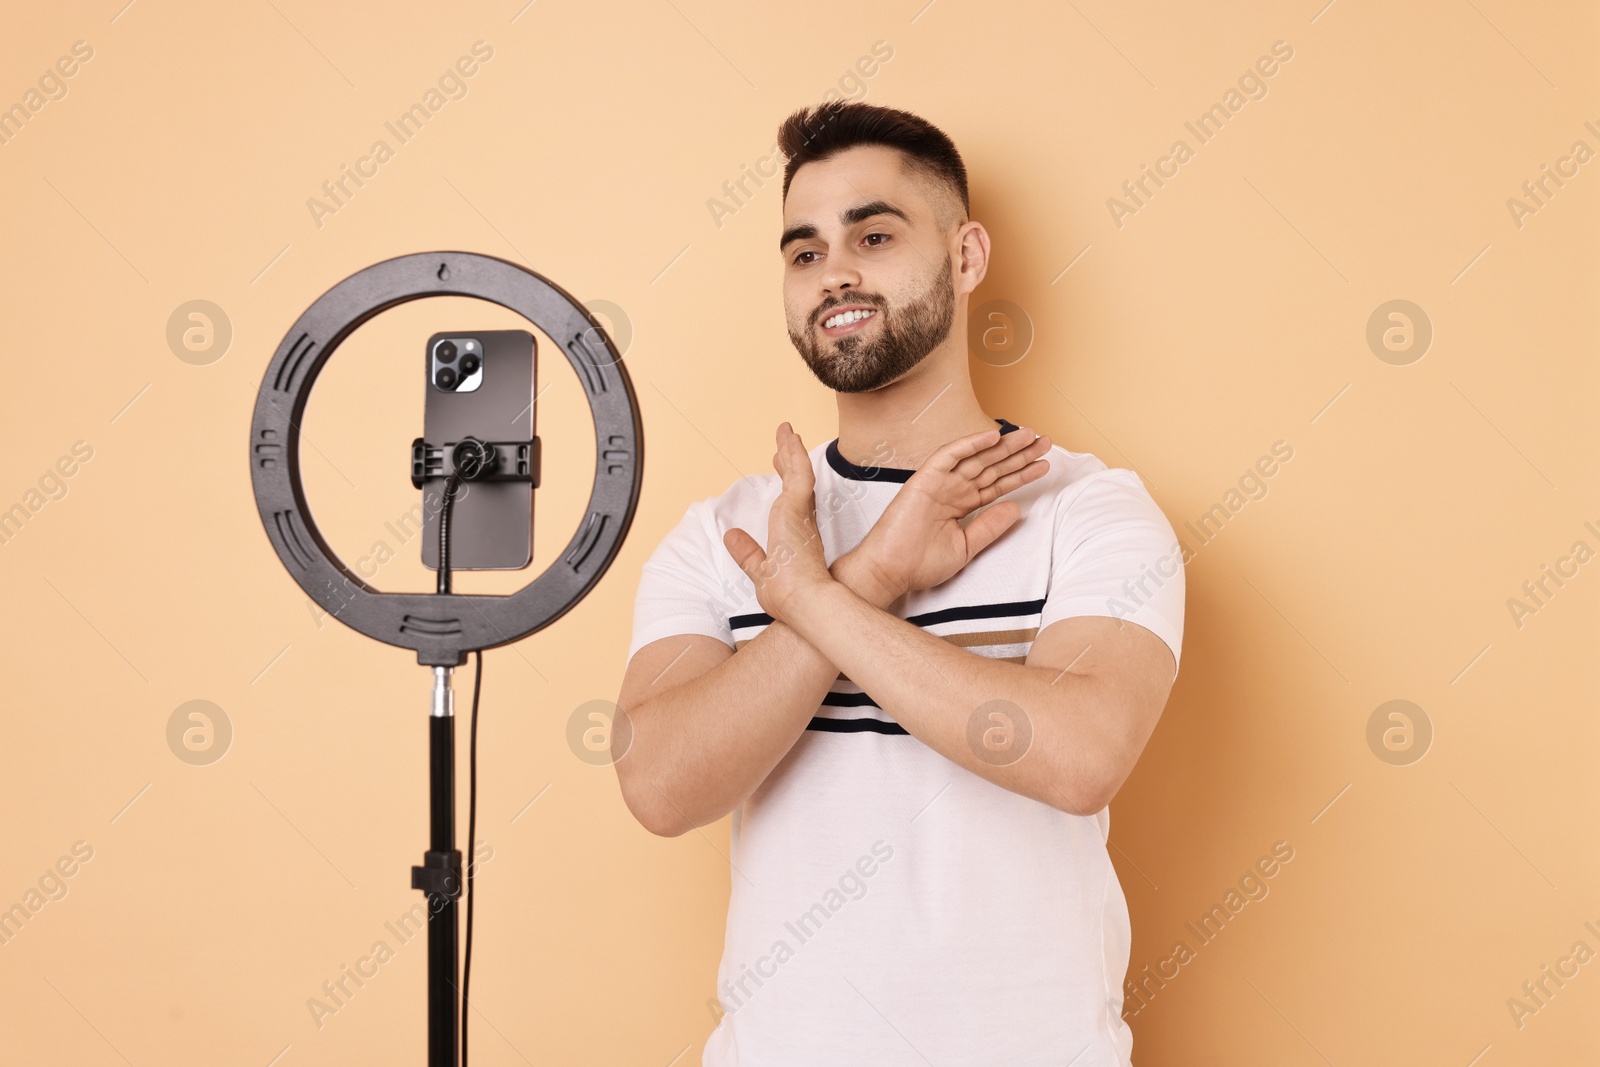 Photo of Blogger recording video with smartphone and ring lamp on beige background